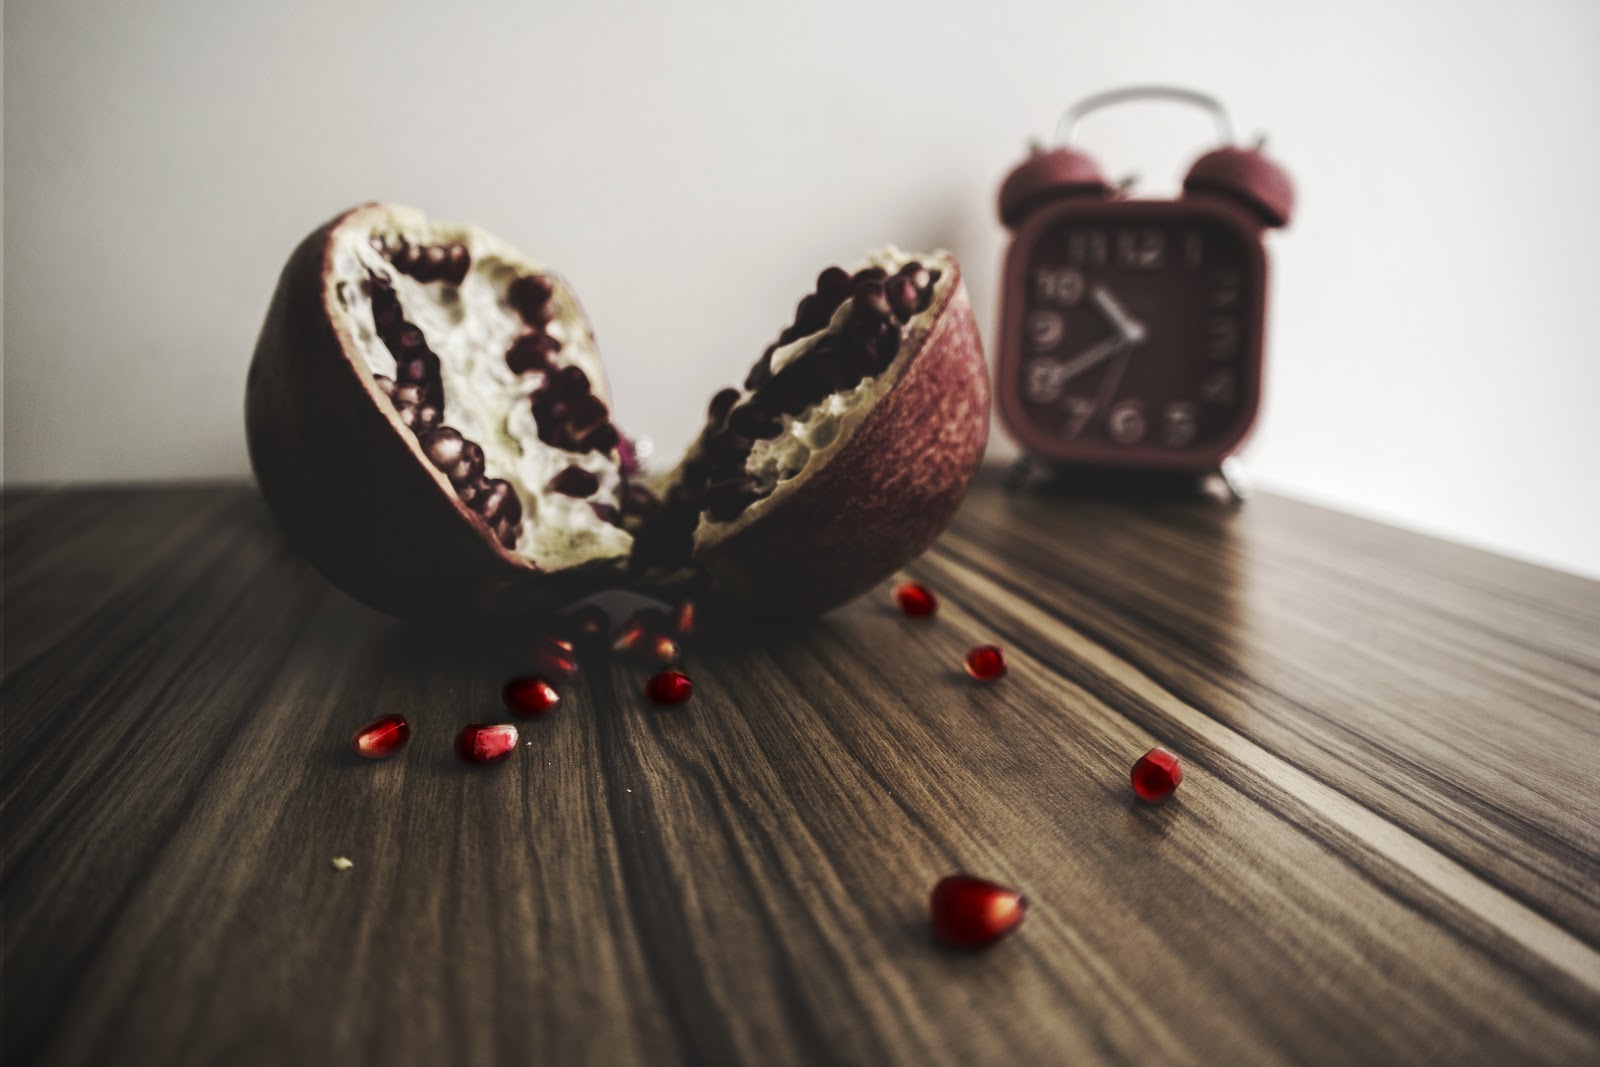 pomegranate and clock on table